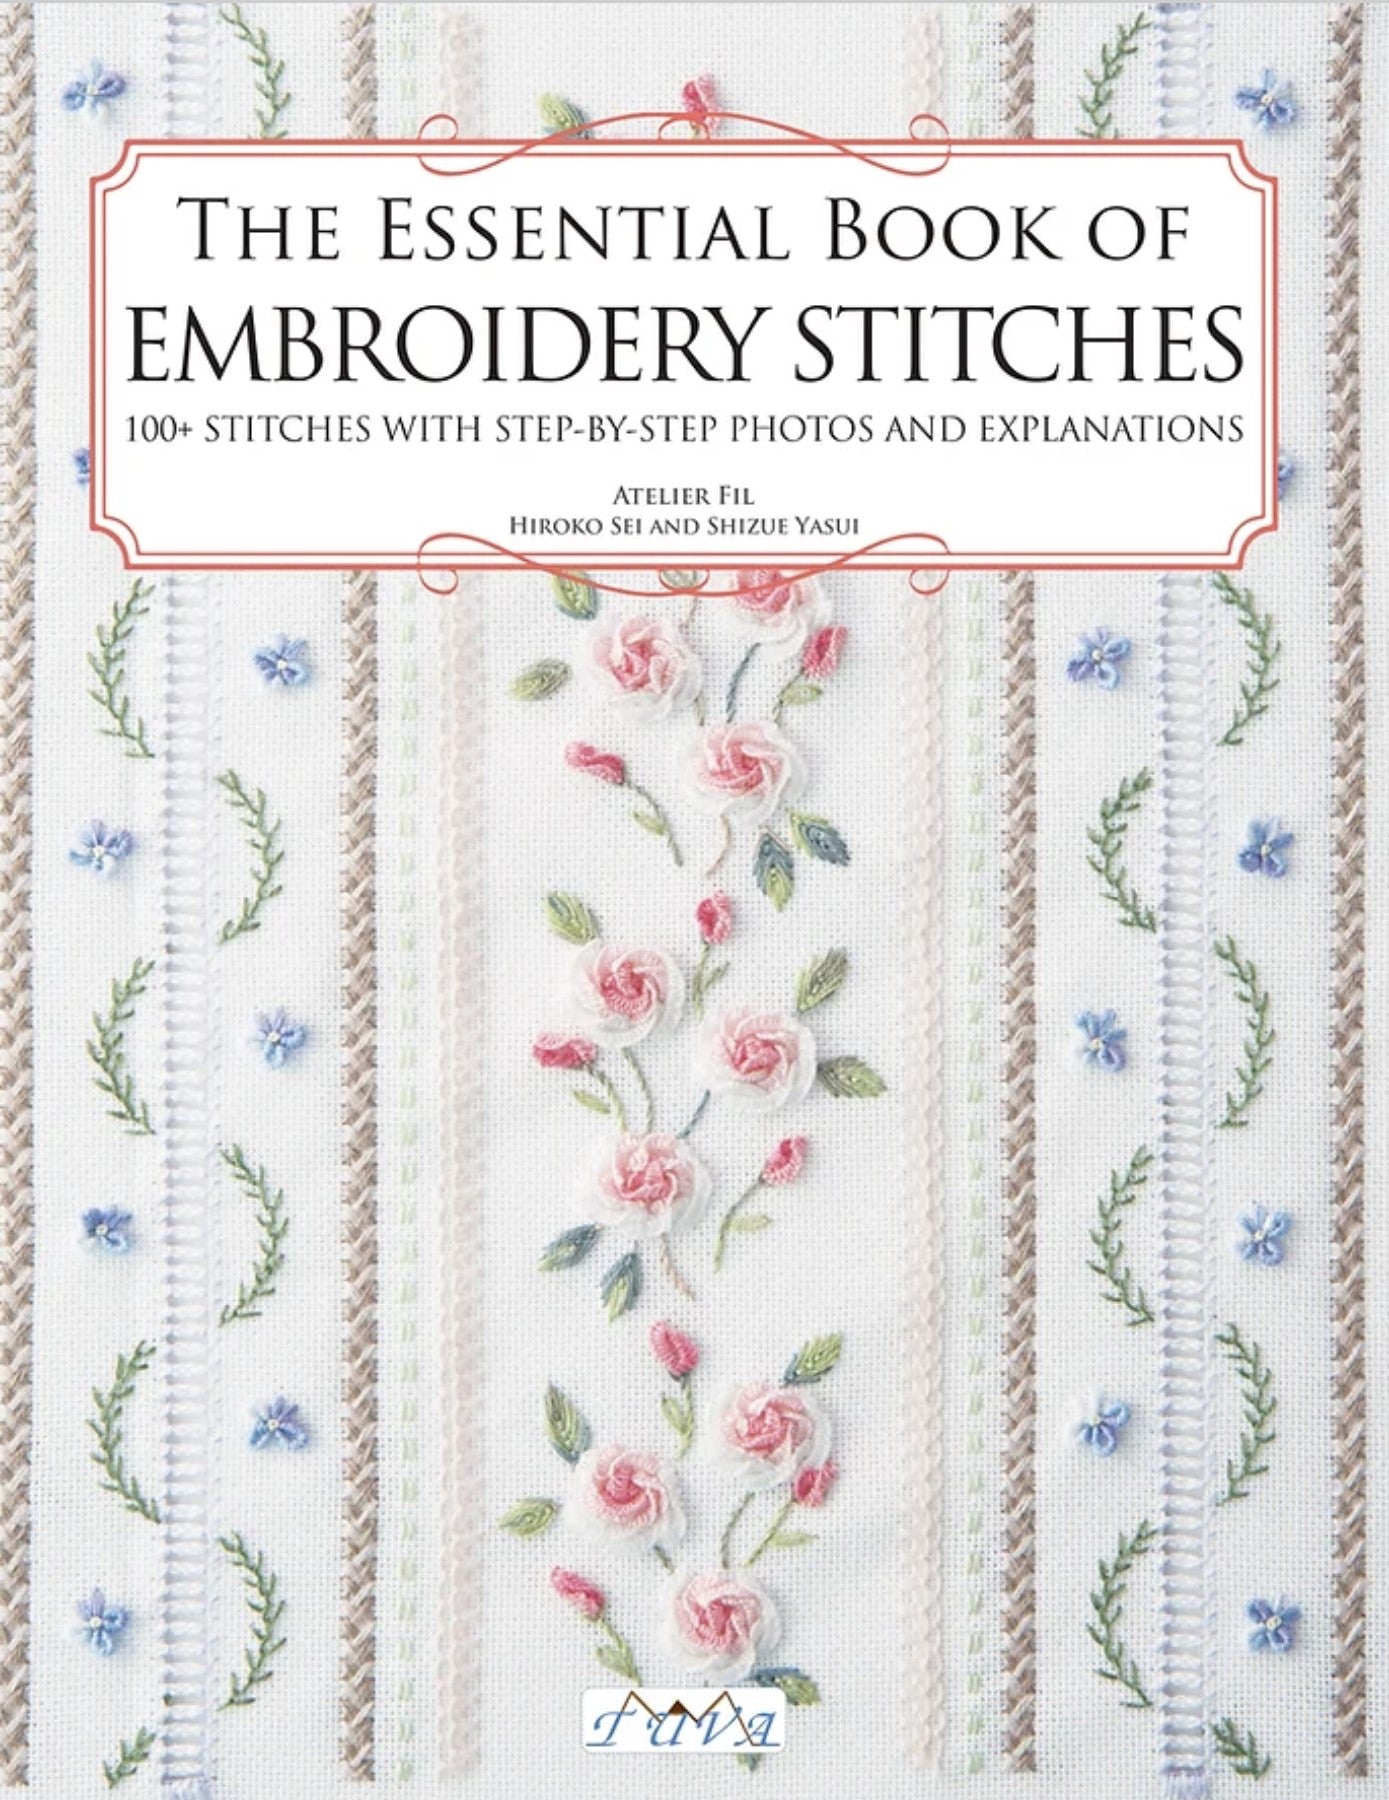 Freshly Stitched: Modern Embroidery for Absolute Beginners [Book]